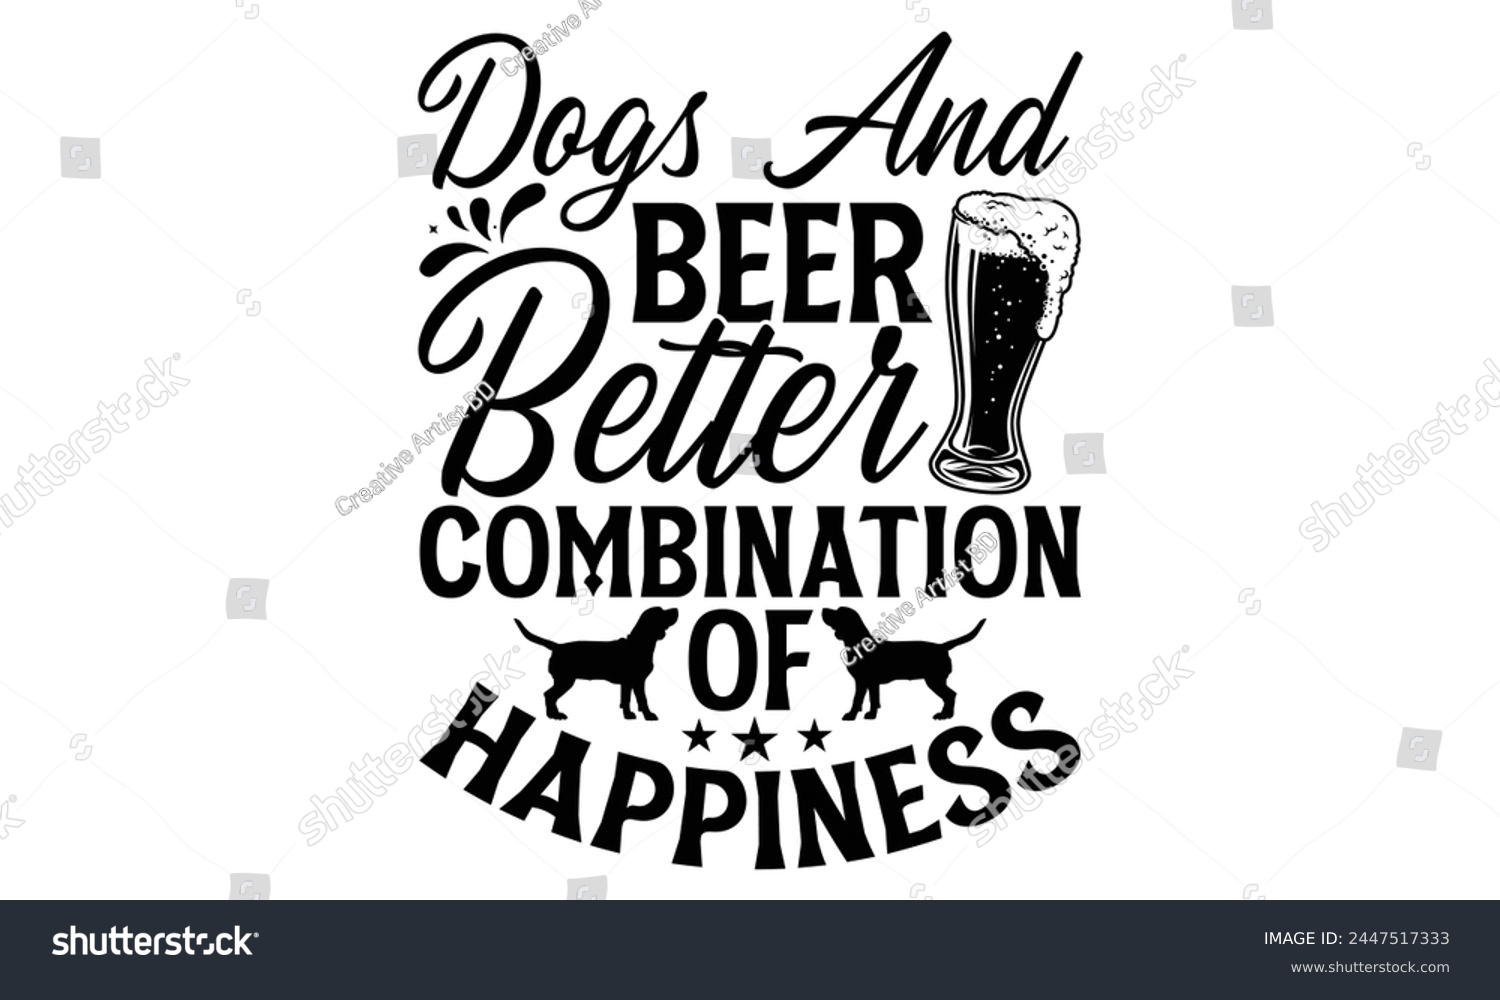 SVG of Dogs And Beer Better Combination Of Happiness - Dog T Shirt Design, Hand drawn lettering phrase isolated on white background, For the design of postcards, banner, flyer and mug. svg